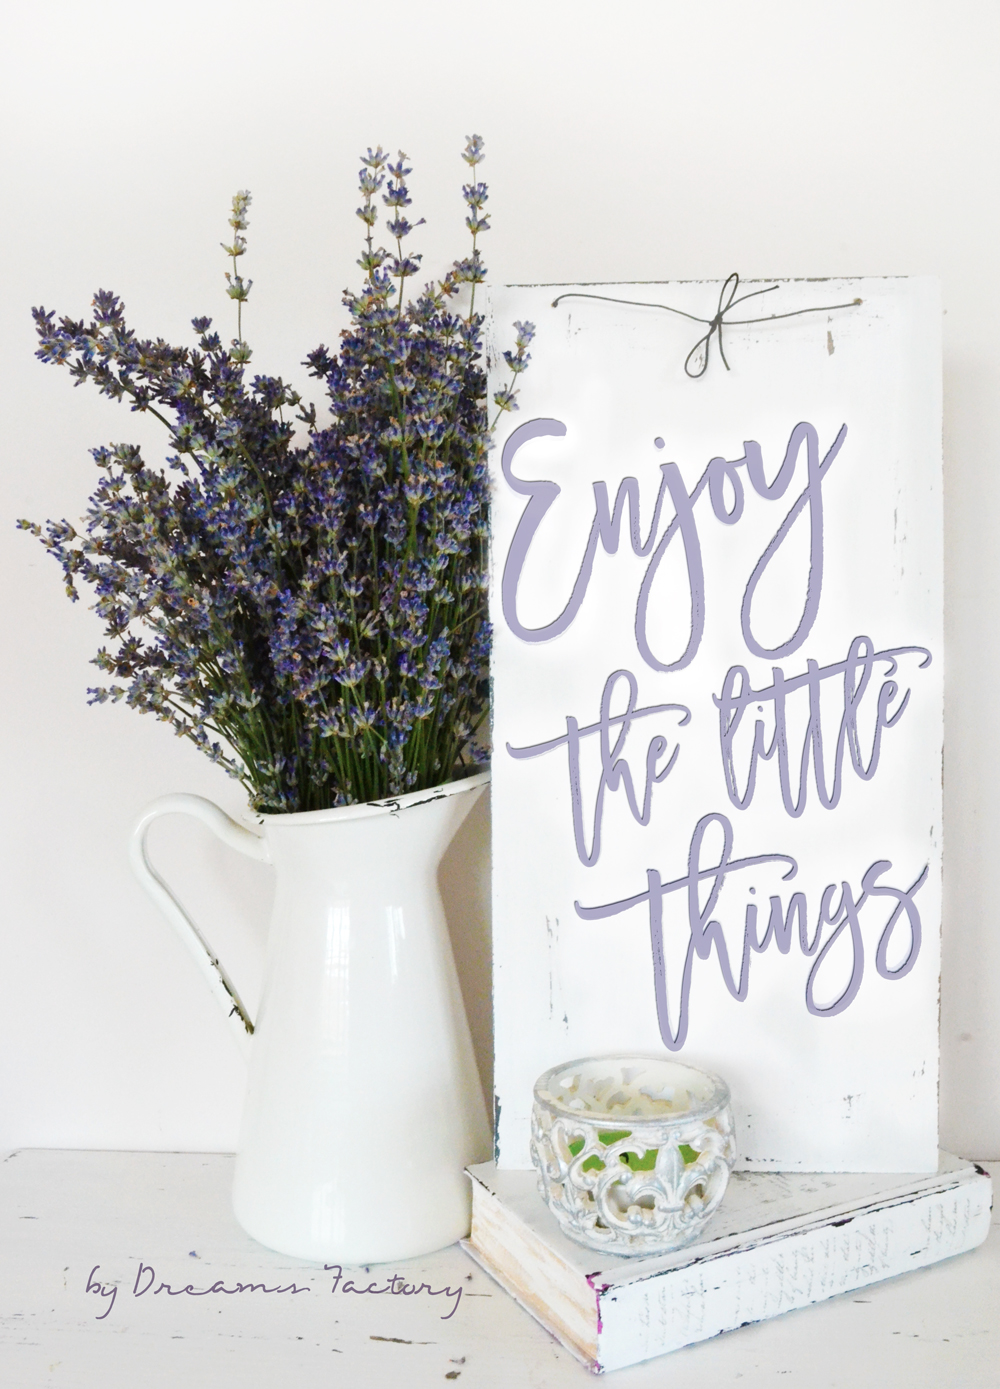 Enjoy the little things sign + free printable | Dreams Factory